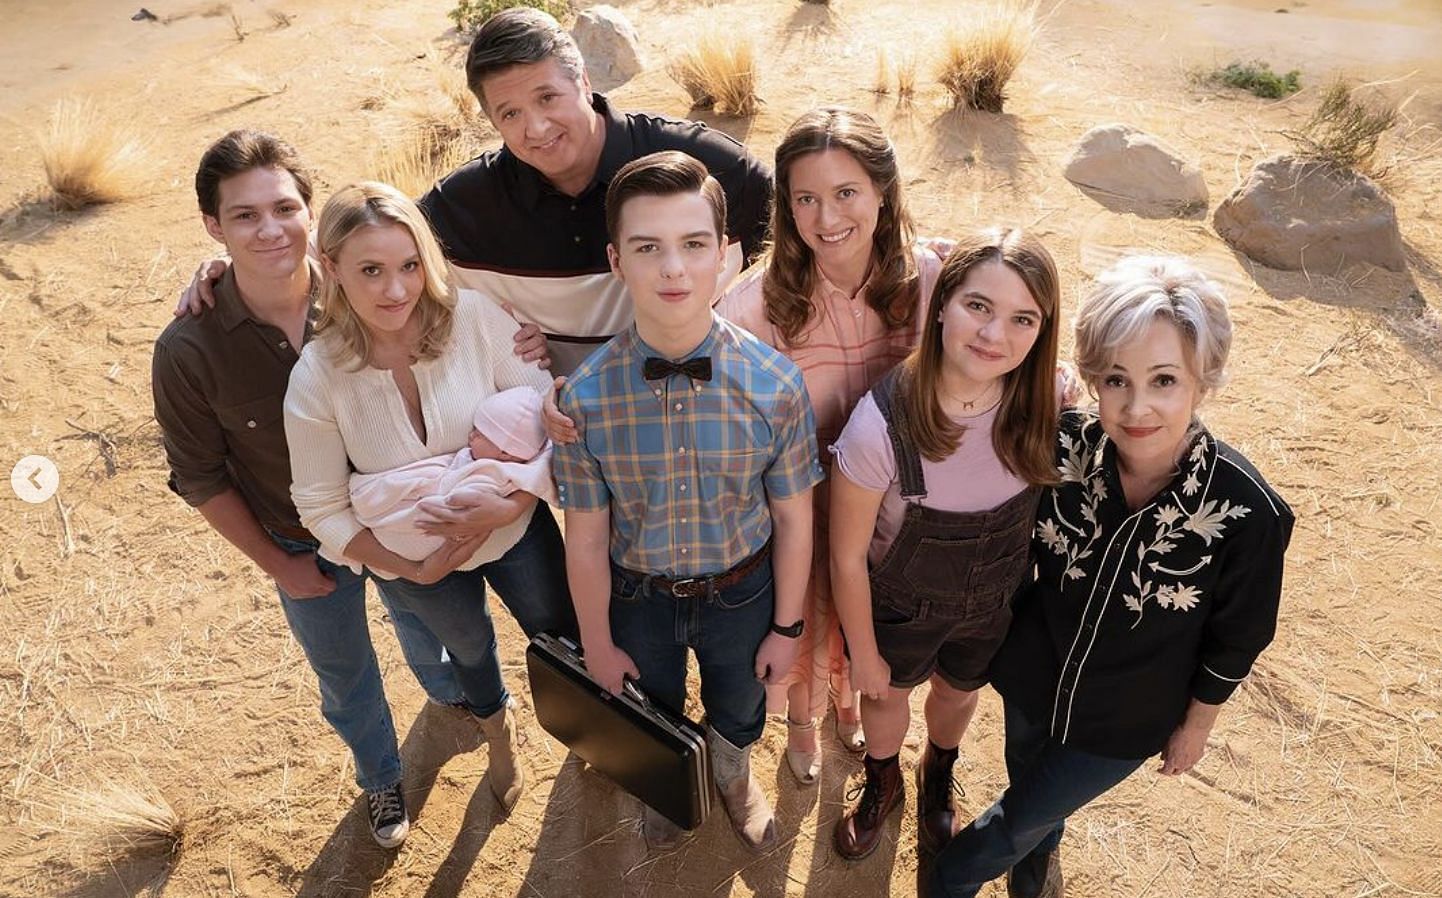 A still of the characters from Young Sheldon. (Image via Instagram/youngsheldoncbs)